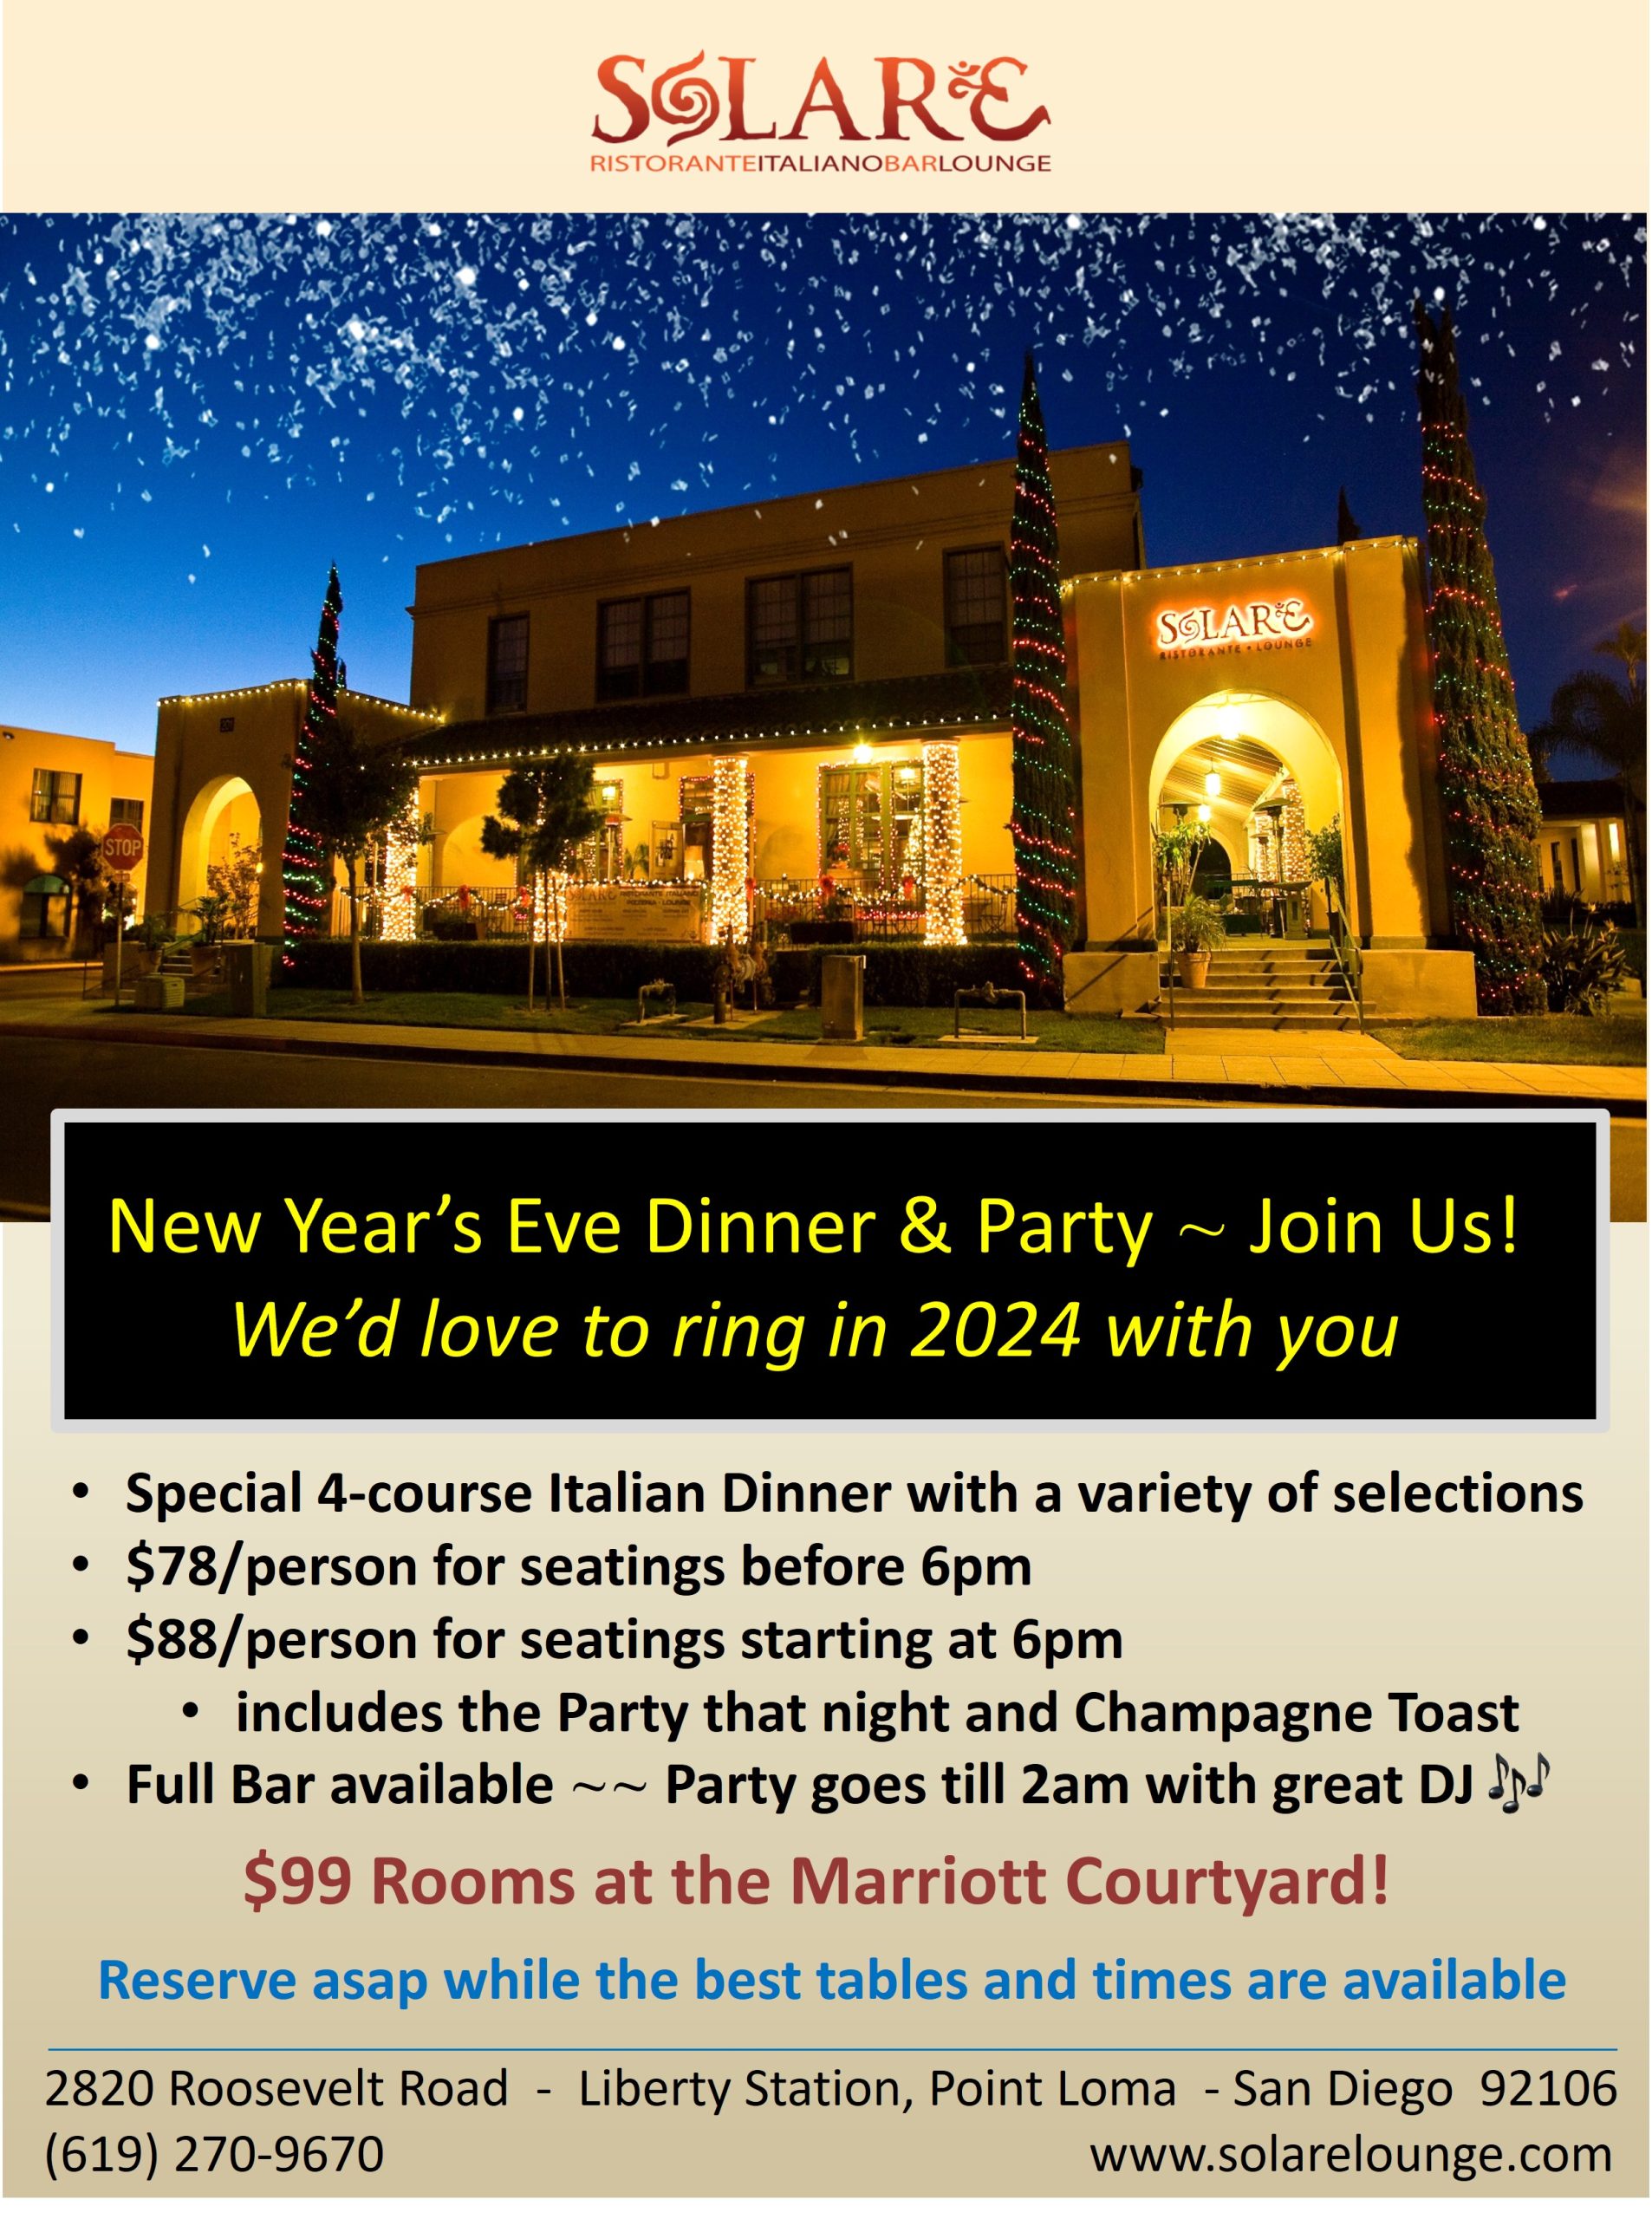 <a id="Solare-NYE-Dinner-Party"></a>Solare New Year's Eve Dinner & Party!